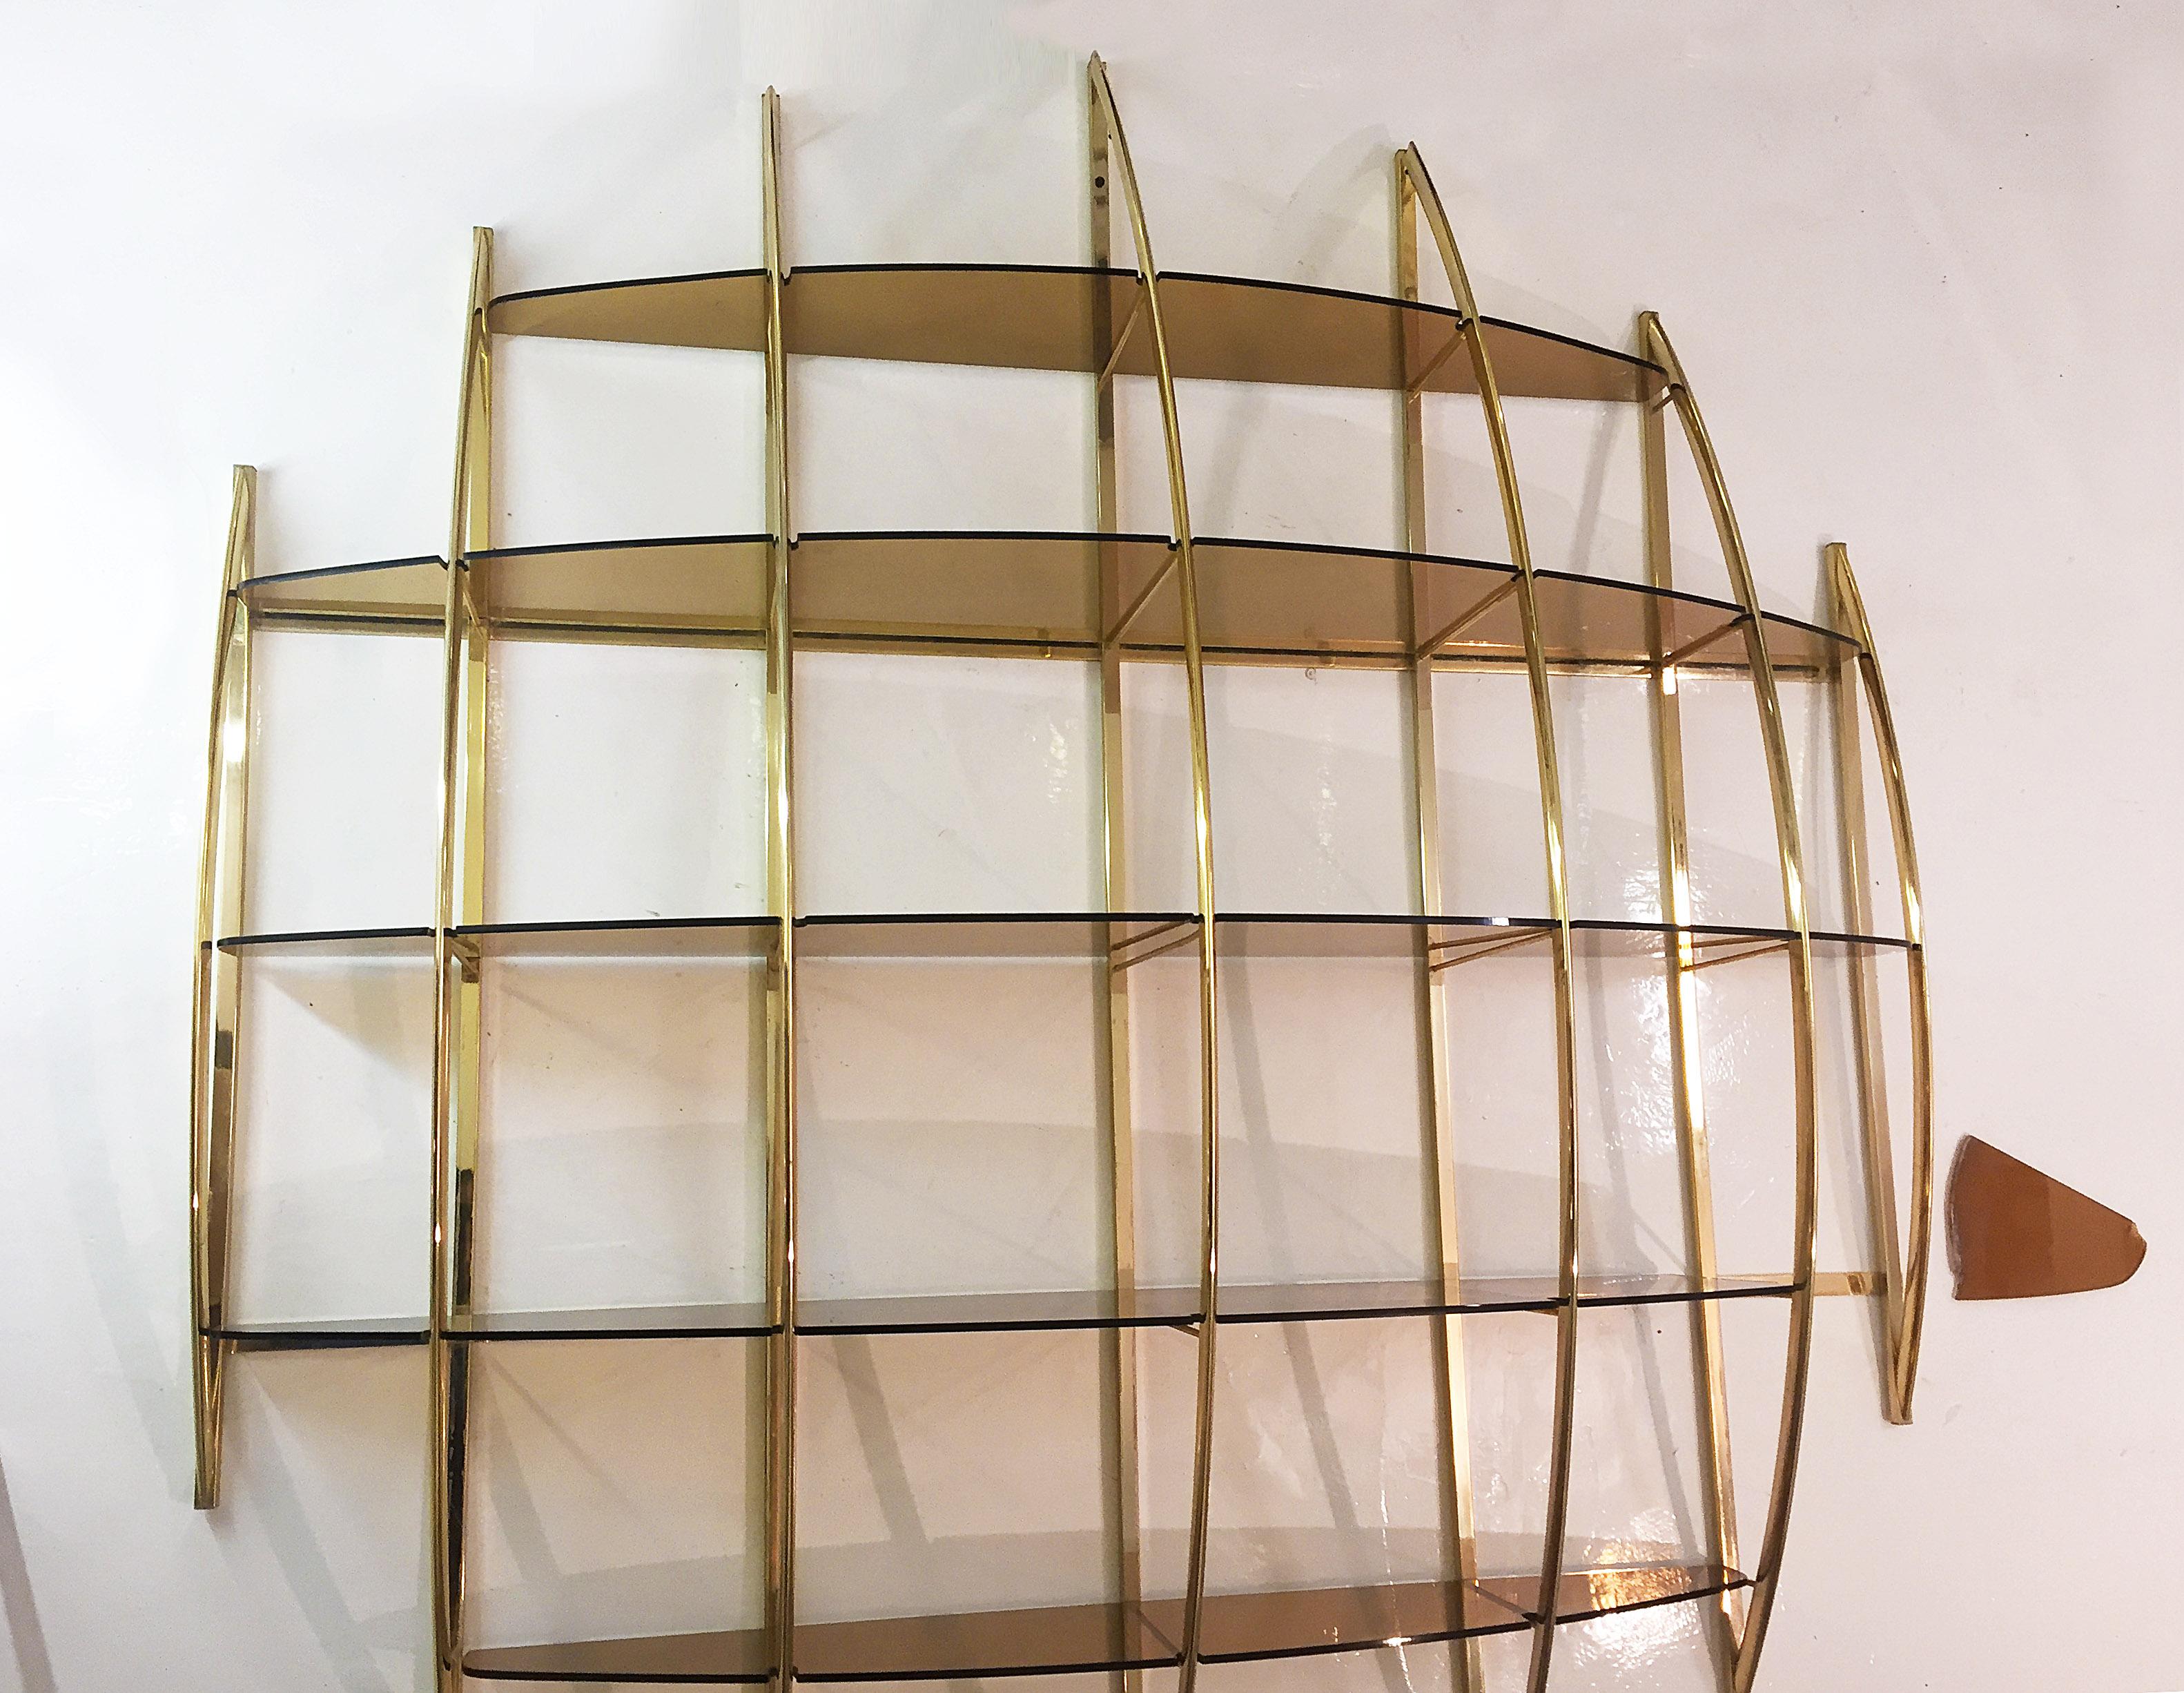 An extremely rare Manferdo Massironi brass semi-spherical shelving unit with interlocking smoked glass shelves. This piece by Massironi is usually and most commonly seen in wood or chrome, this is the first time we see it anywhere in brass! The